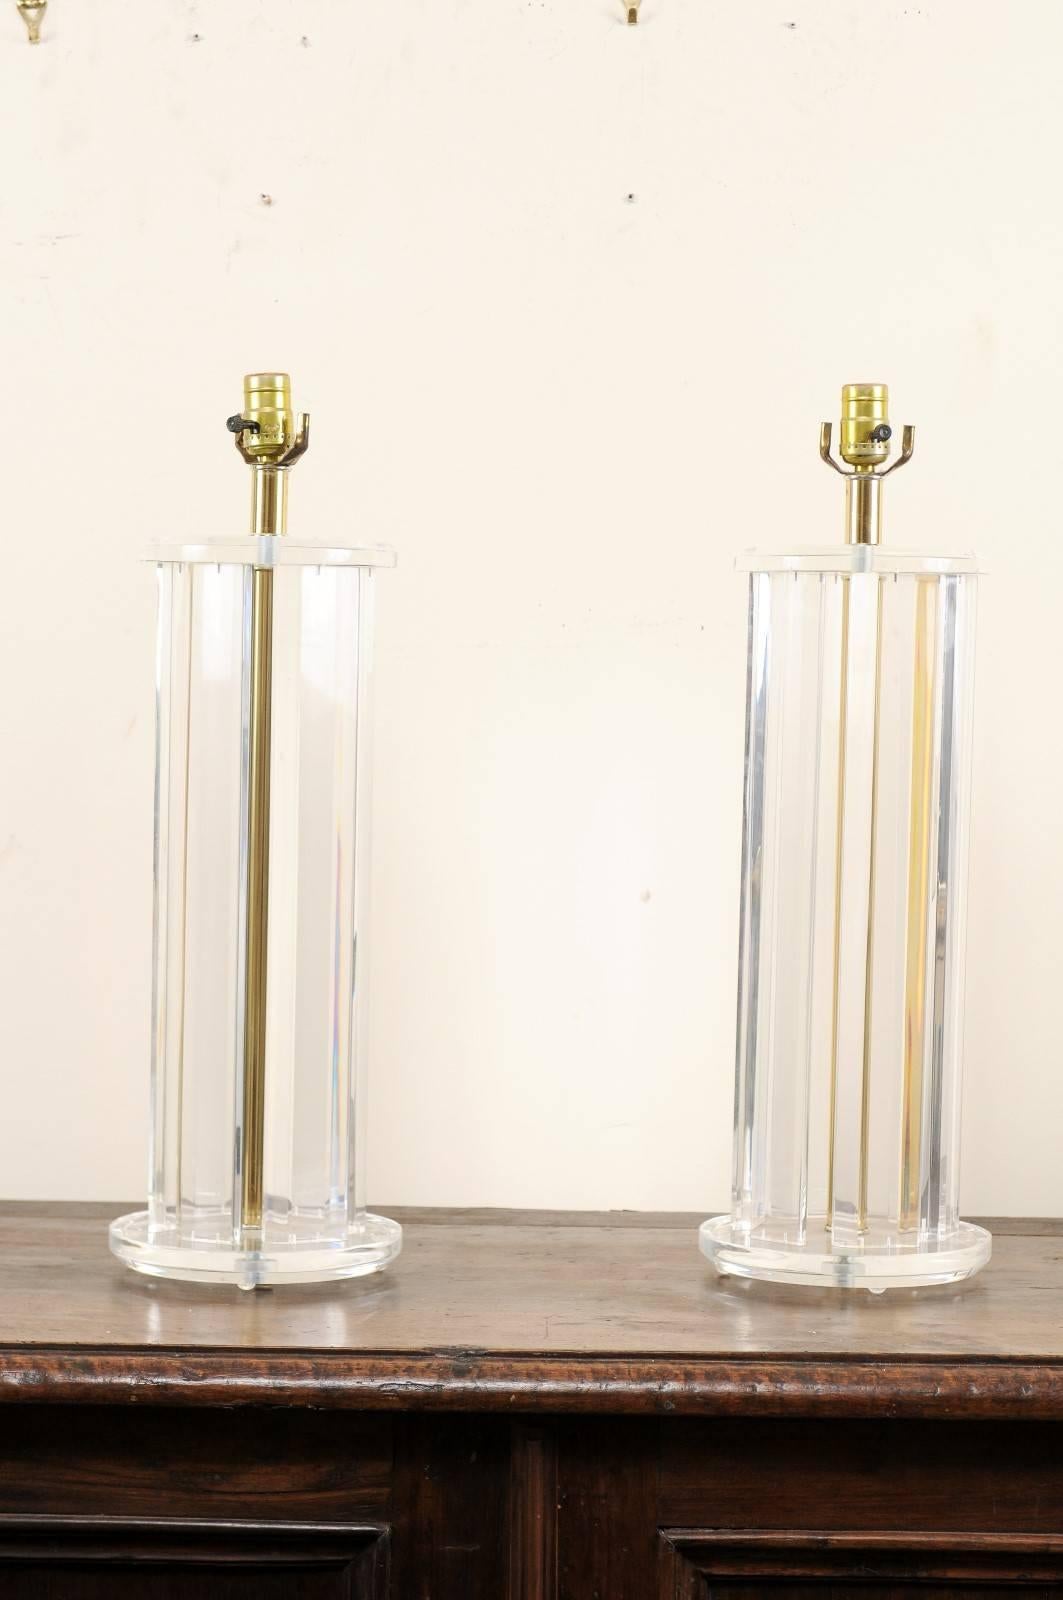 A pair of American Lucite table lamps from the mid-20th century. This pair of midcentury lamps have a round-shaped body, comprised of Lucite posts mounted in a circle between a circular upper cap and wider, circular base, also in Lucite. There is a